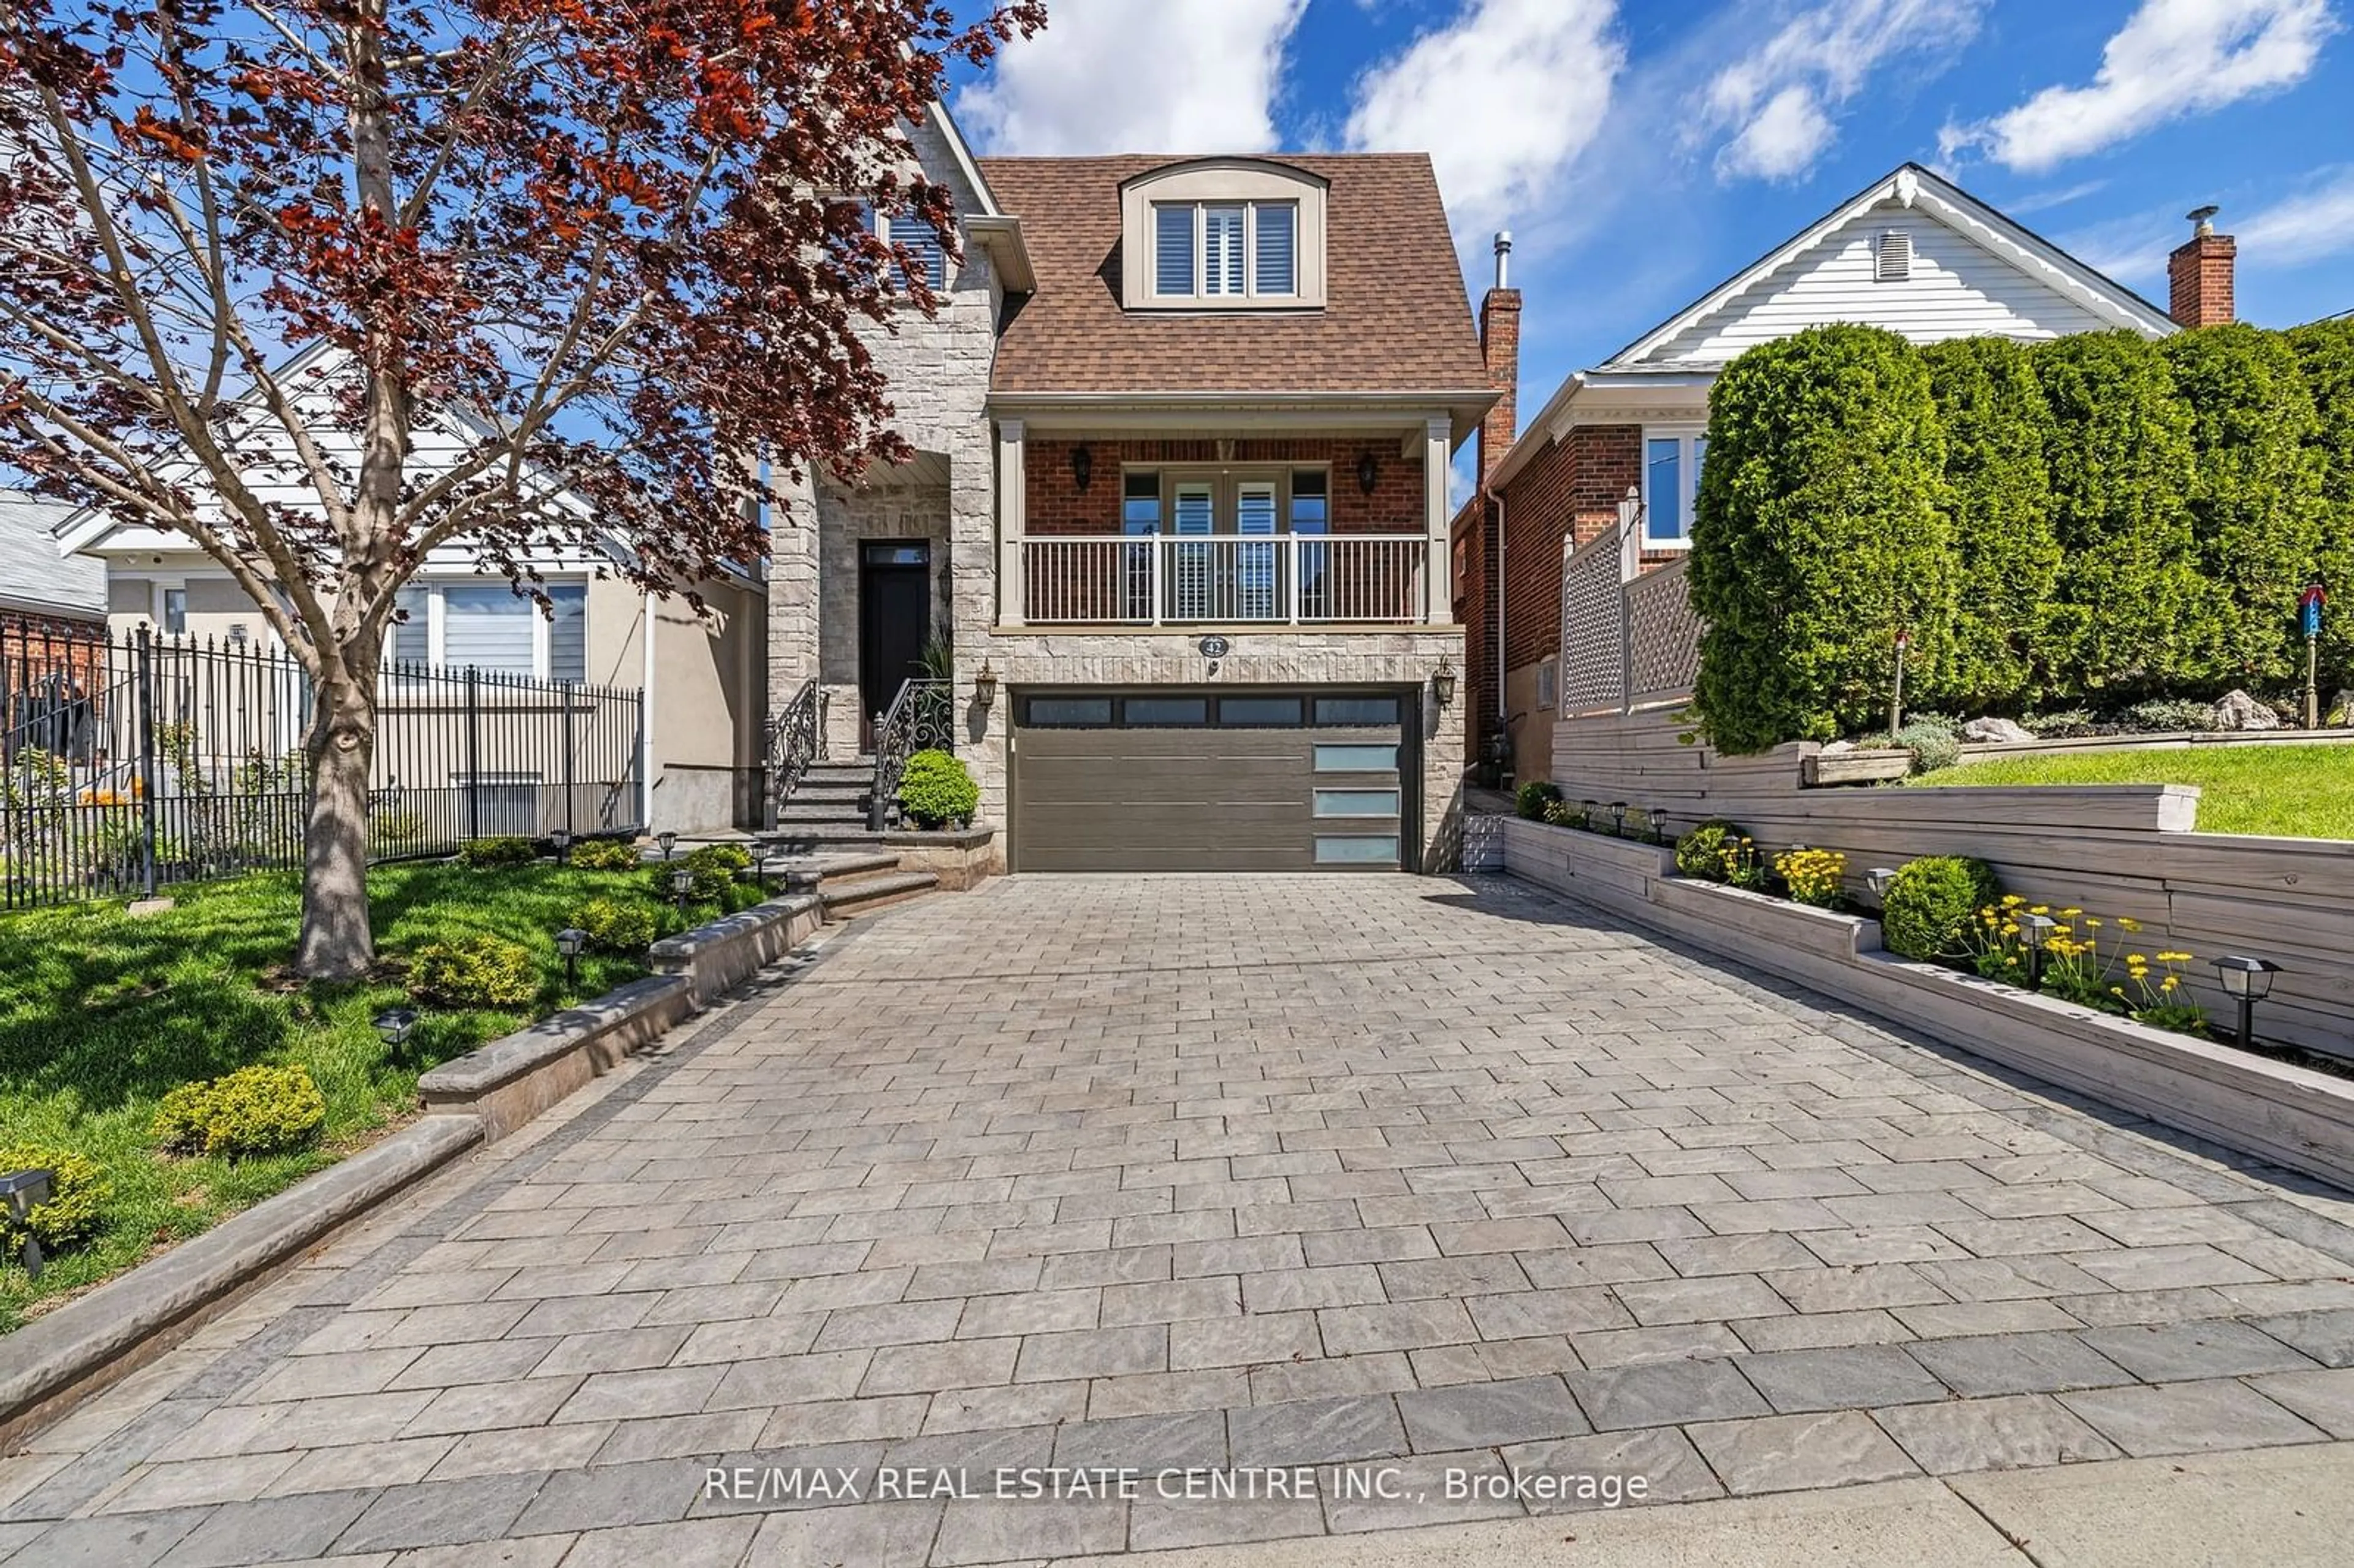 Home with brick exterior material for 42 Ypres Rd, Toronto Ontario M6M 1N9